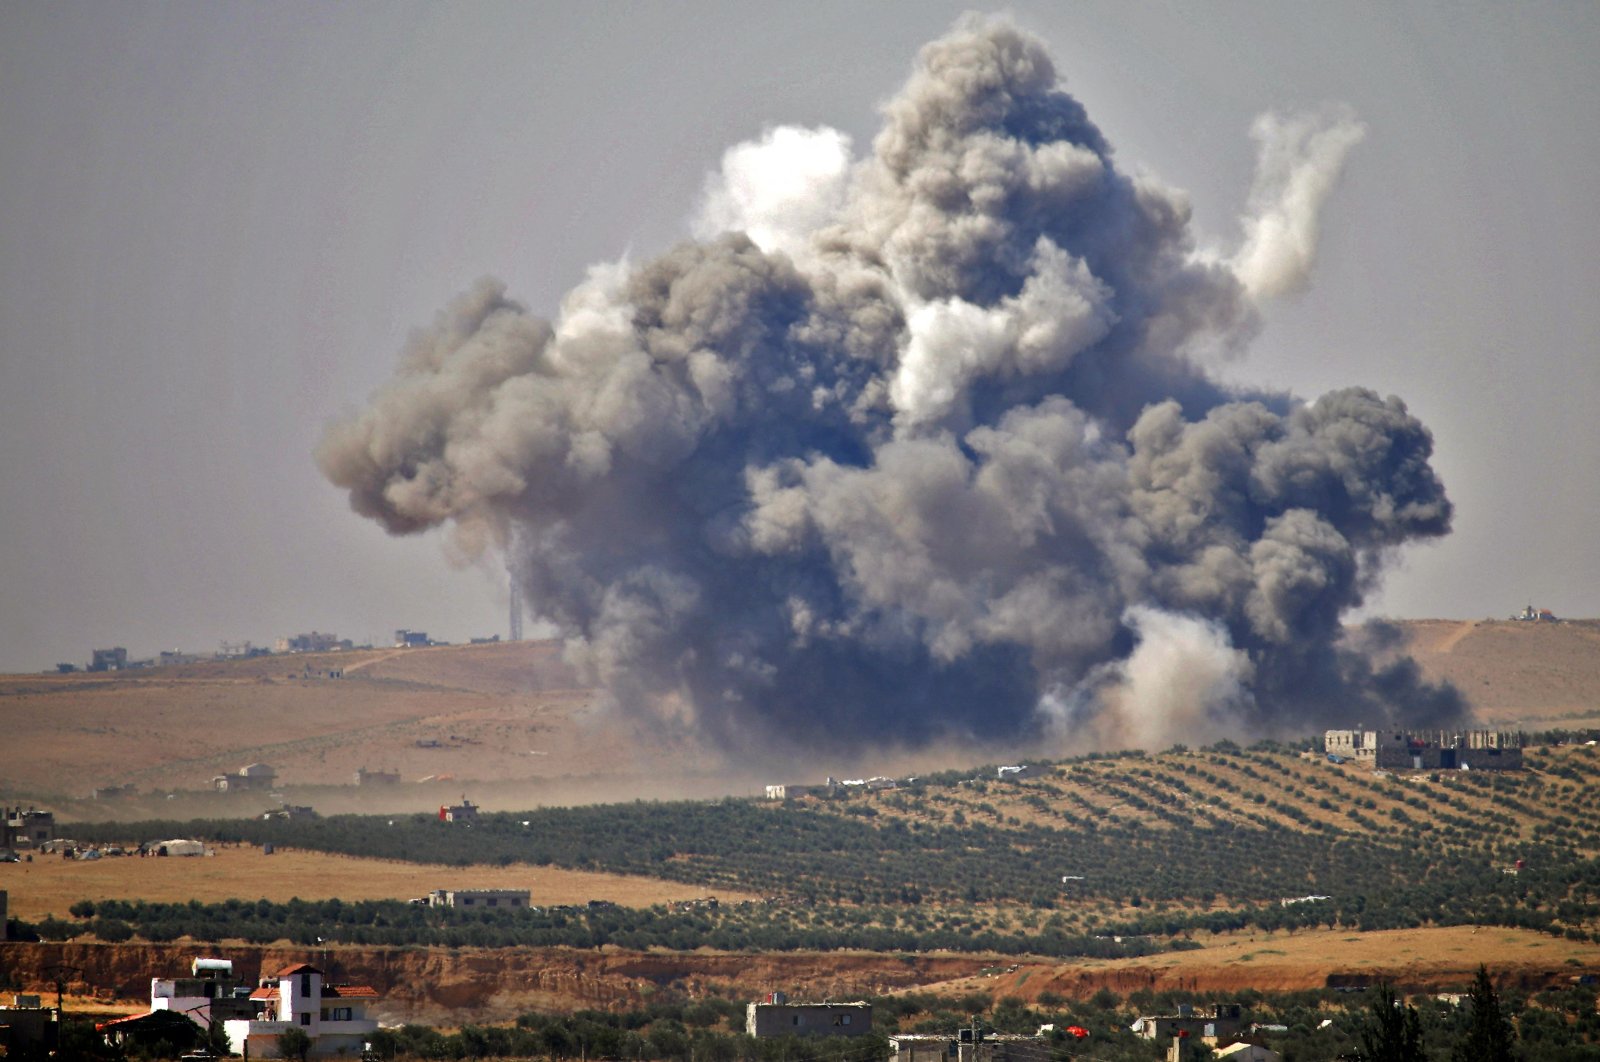 In this file photo taken on July 5, 2018, smoke rises above rebel-held areas of the city of Daraa, during reported airstrikes by Syrian regime forces. (AFP Photo)